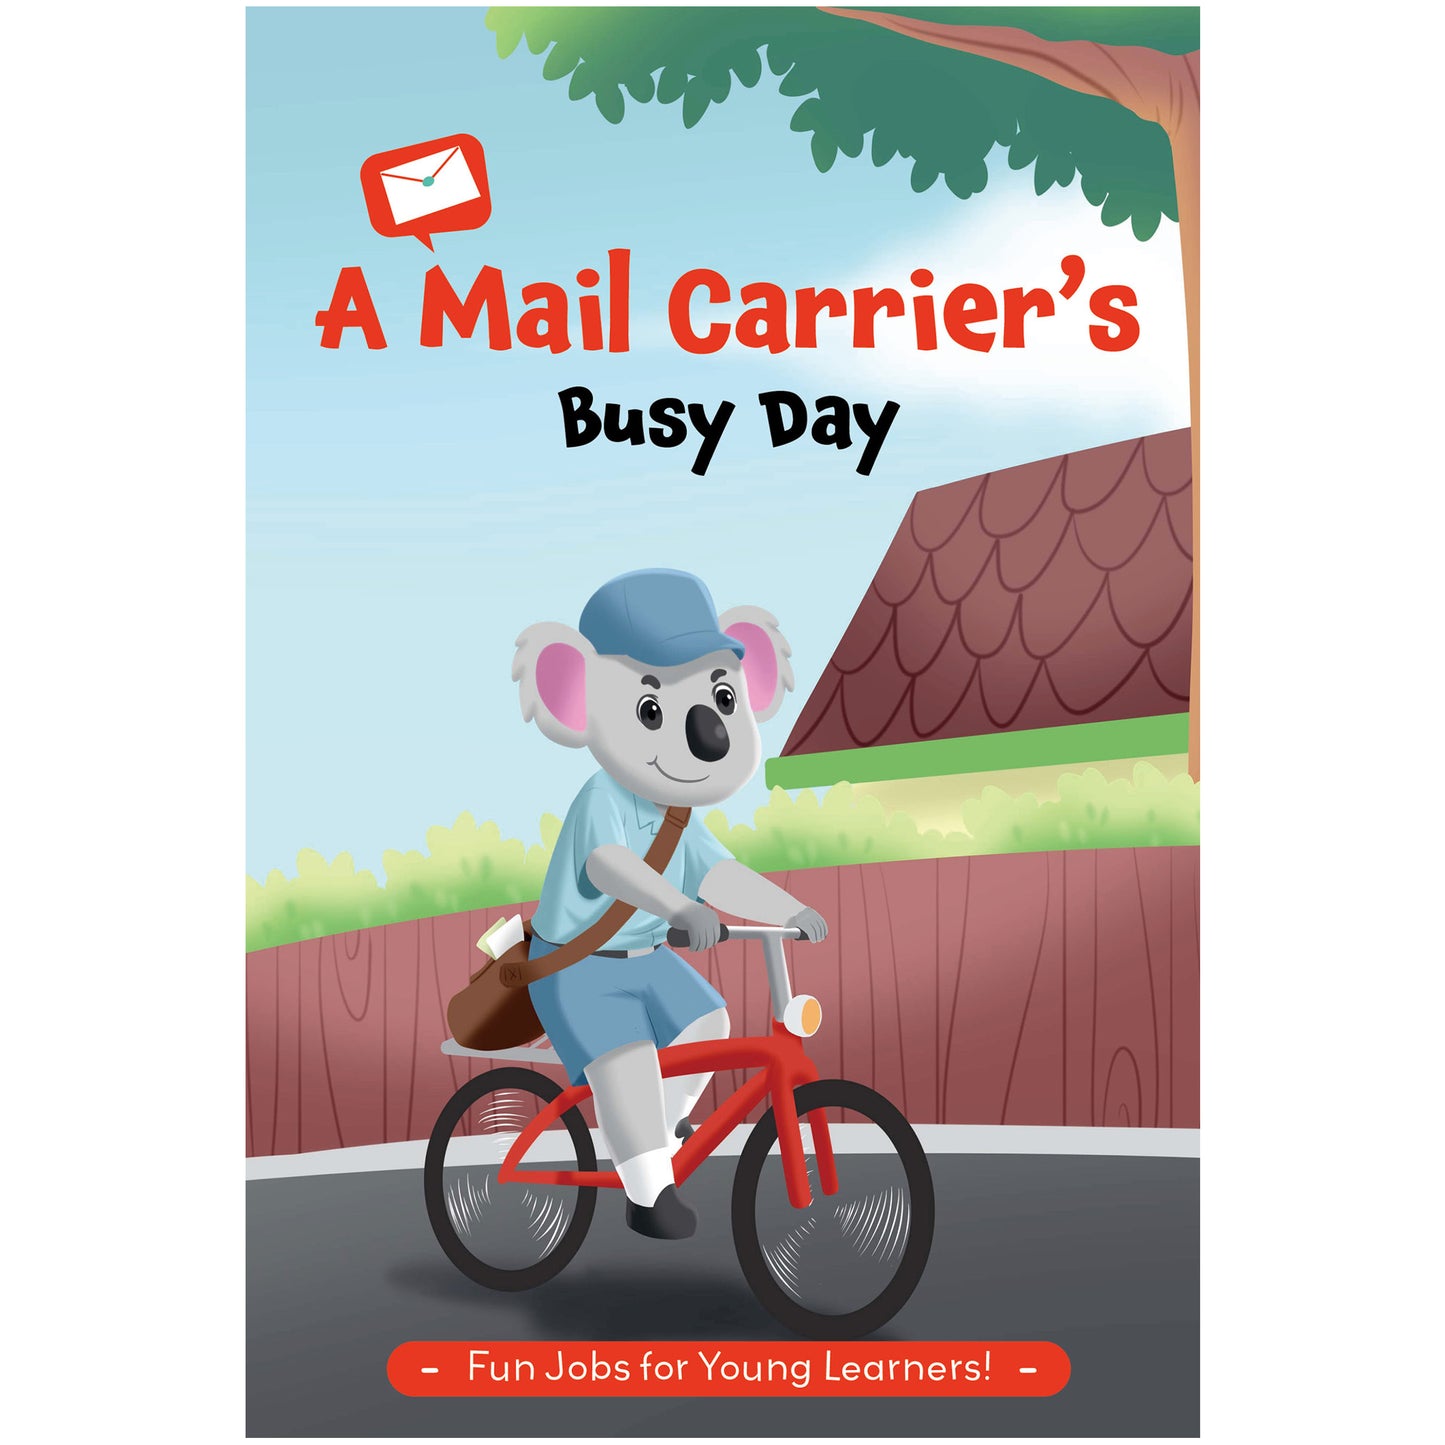 A Mail Carrier's Busy Day